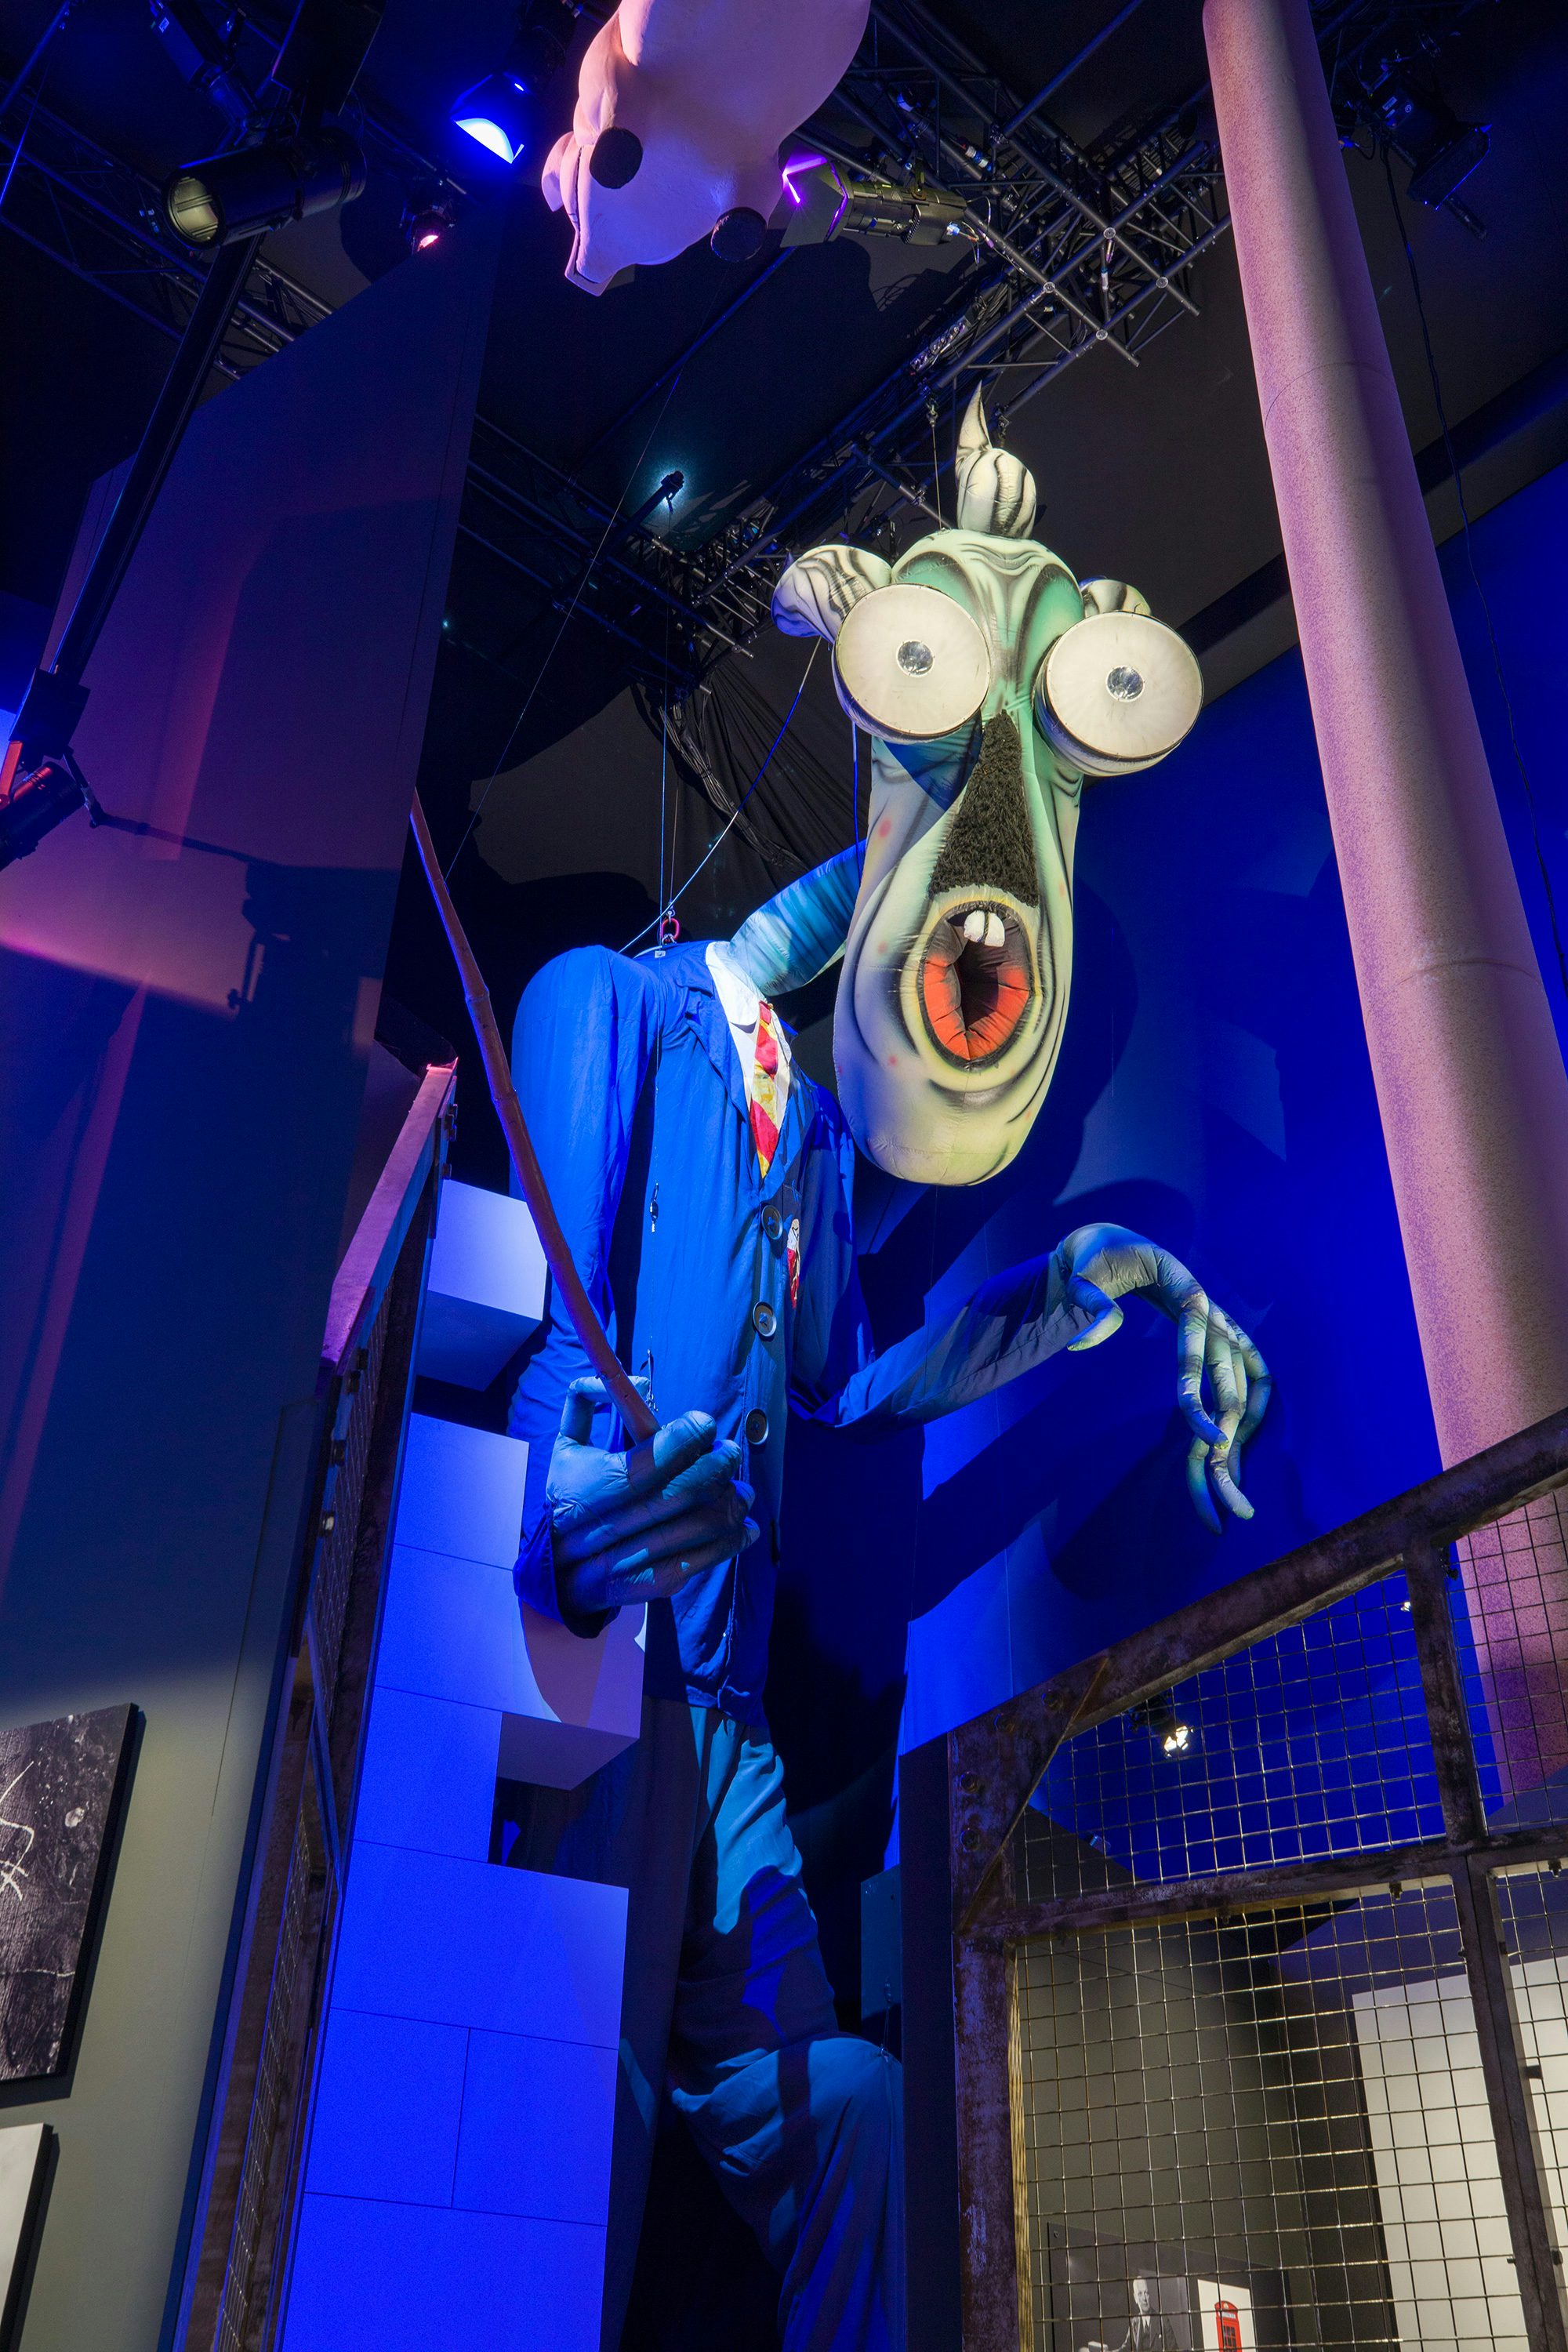 Inflatable 'Teacher' from Roger Waters' tour of The Wall, on show at The Pink Floyd Exhibition: Their Mortal Remains. The character was designed by Gerald Scarfe. Image courtesy of the V&A